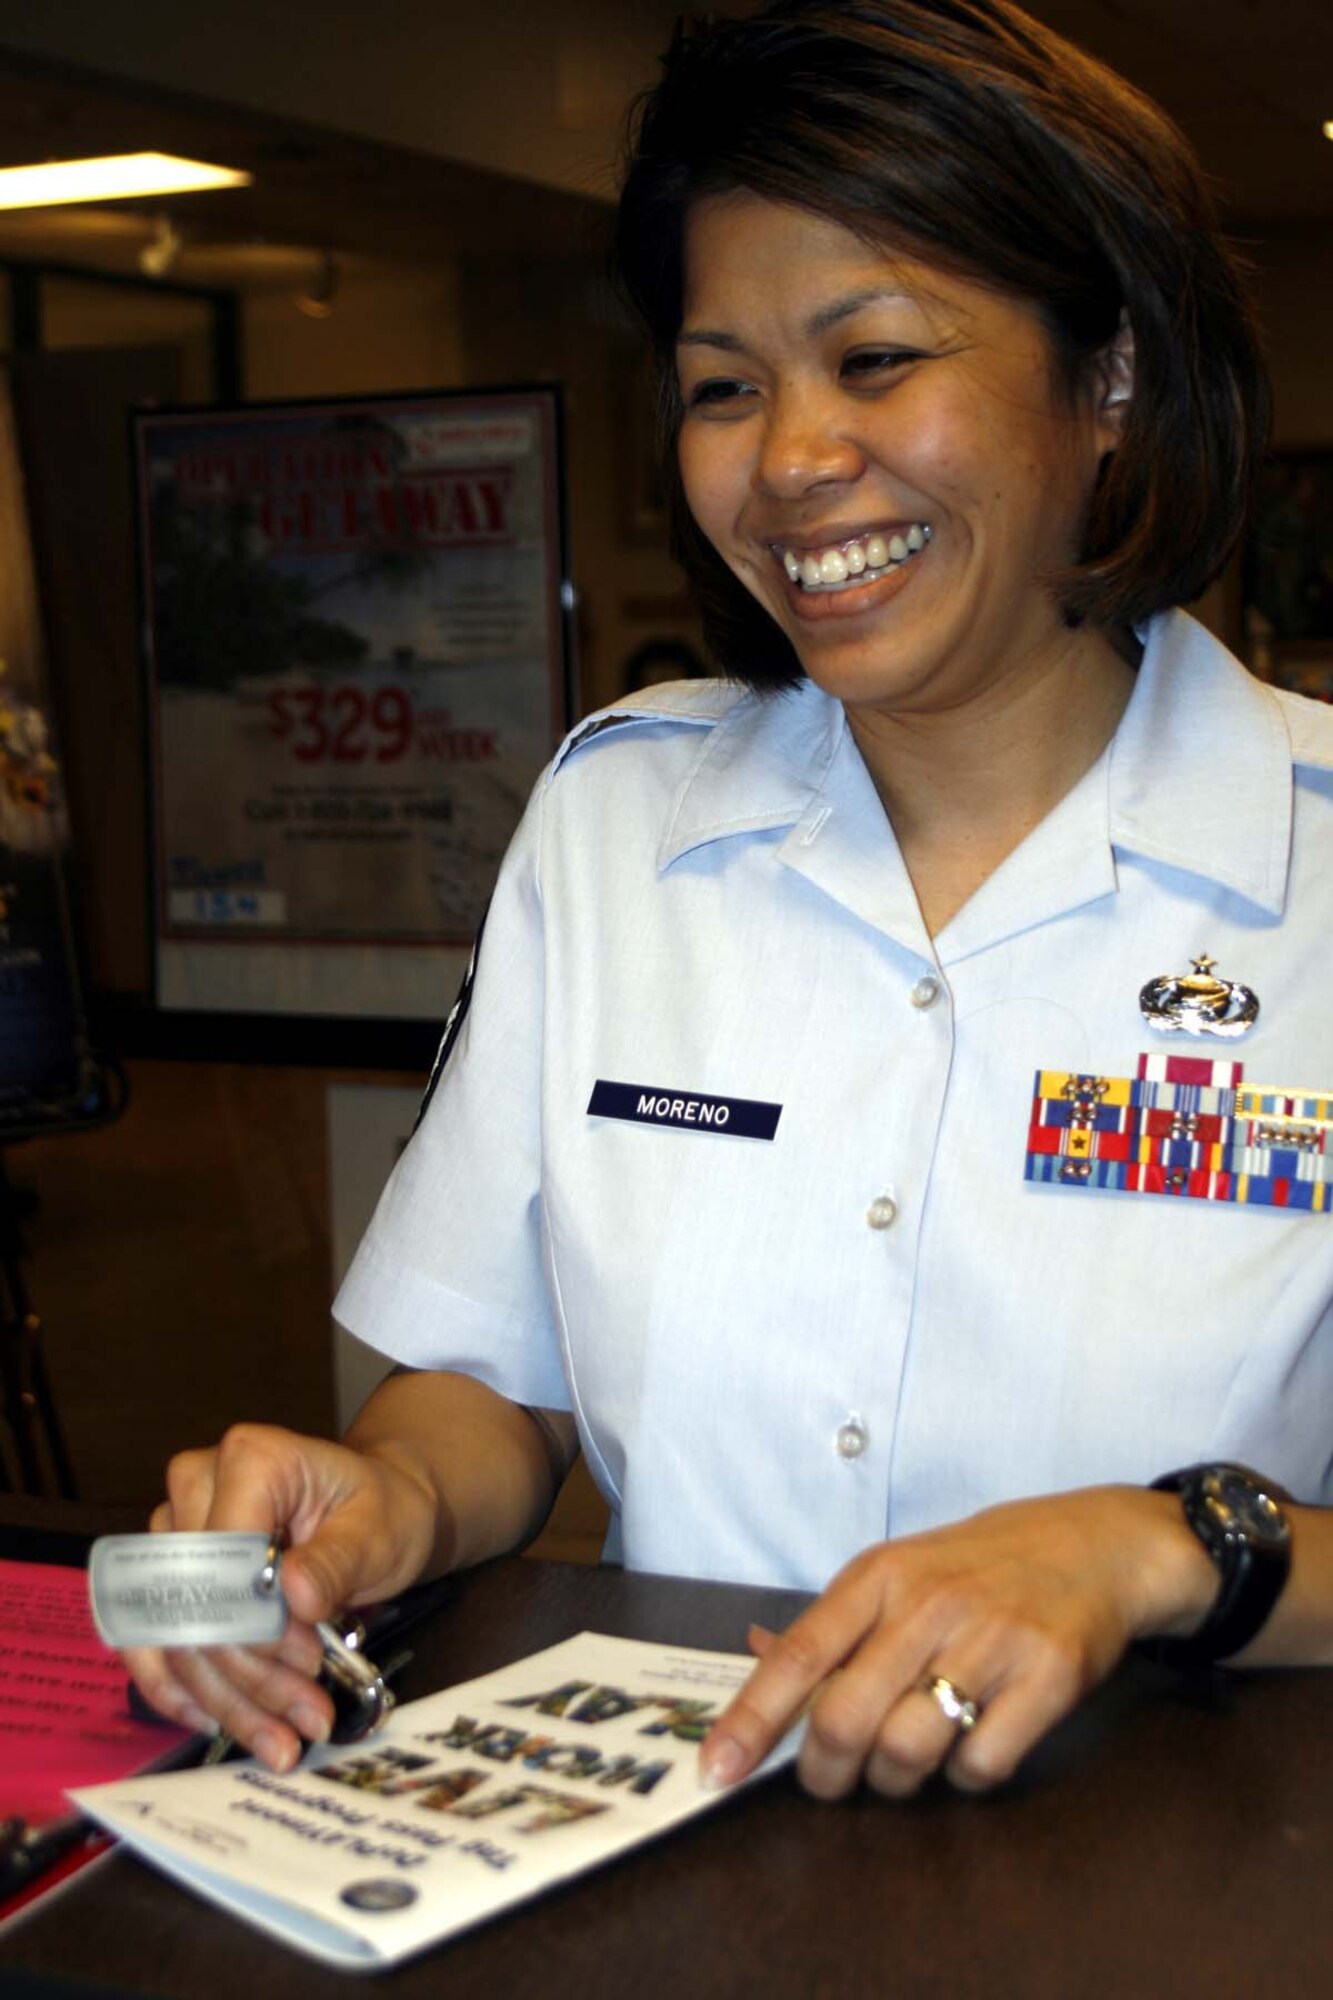 Master Sgt. Nickie Jay Moreno, 72nd Force Support Squadron, shows her DePLAYment tag while signing up for an Oklahoma tour at the Information, Ticket and Travel Office. (Air Force photo by Becky Pillifant)
